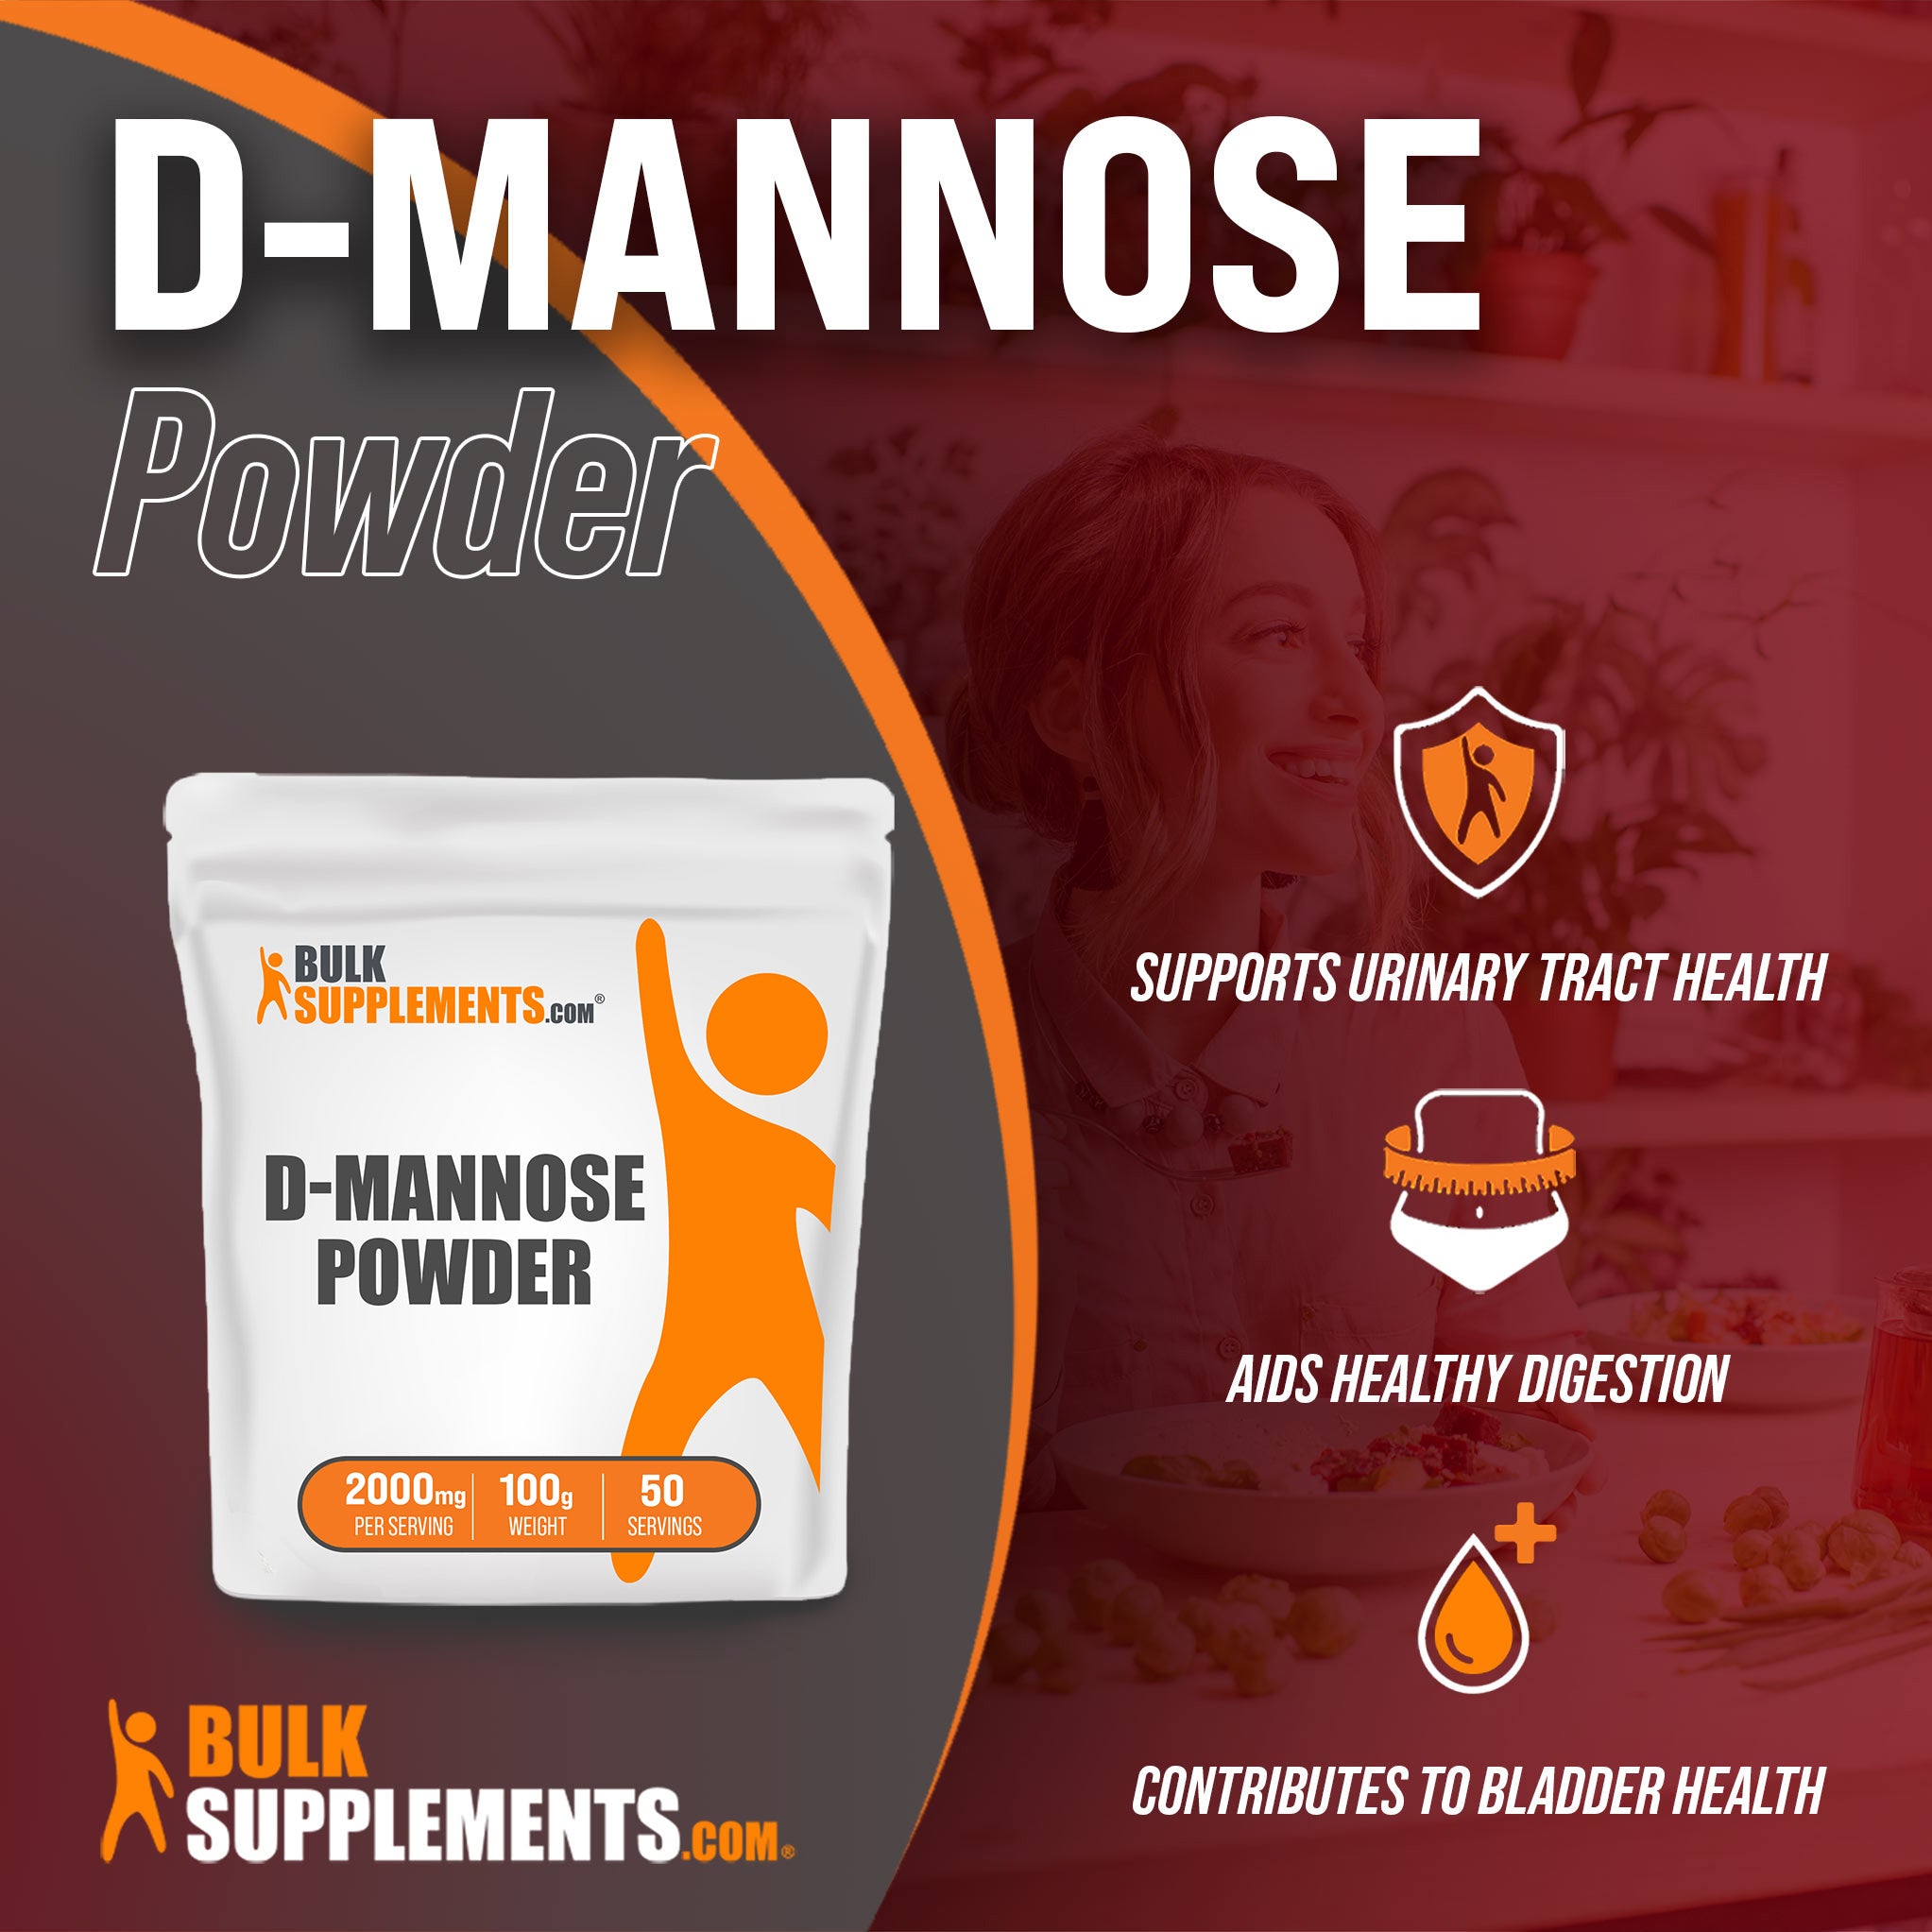 Benefits of D-Mannose; supports urinary tract health, aids healthy digestion, contributes to bladder health